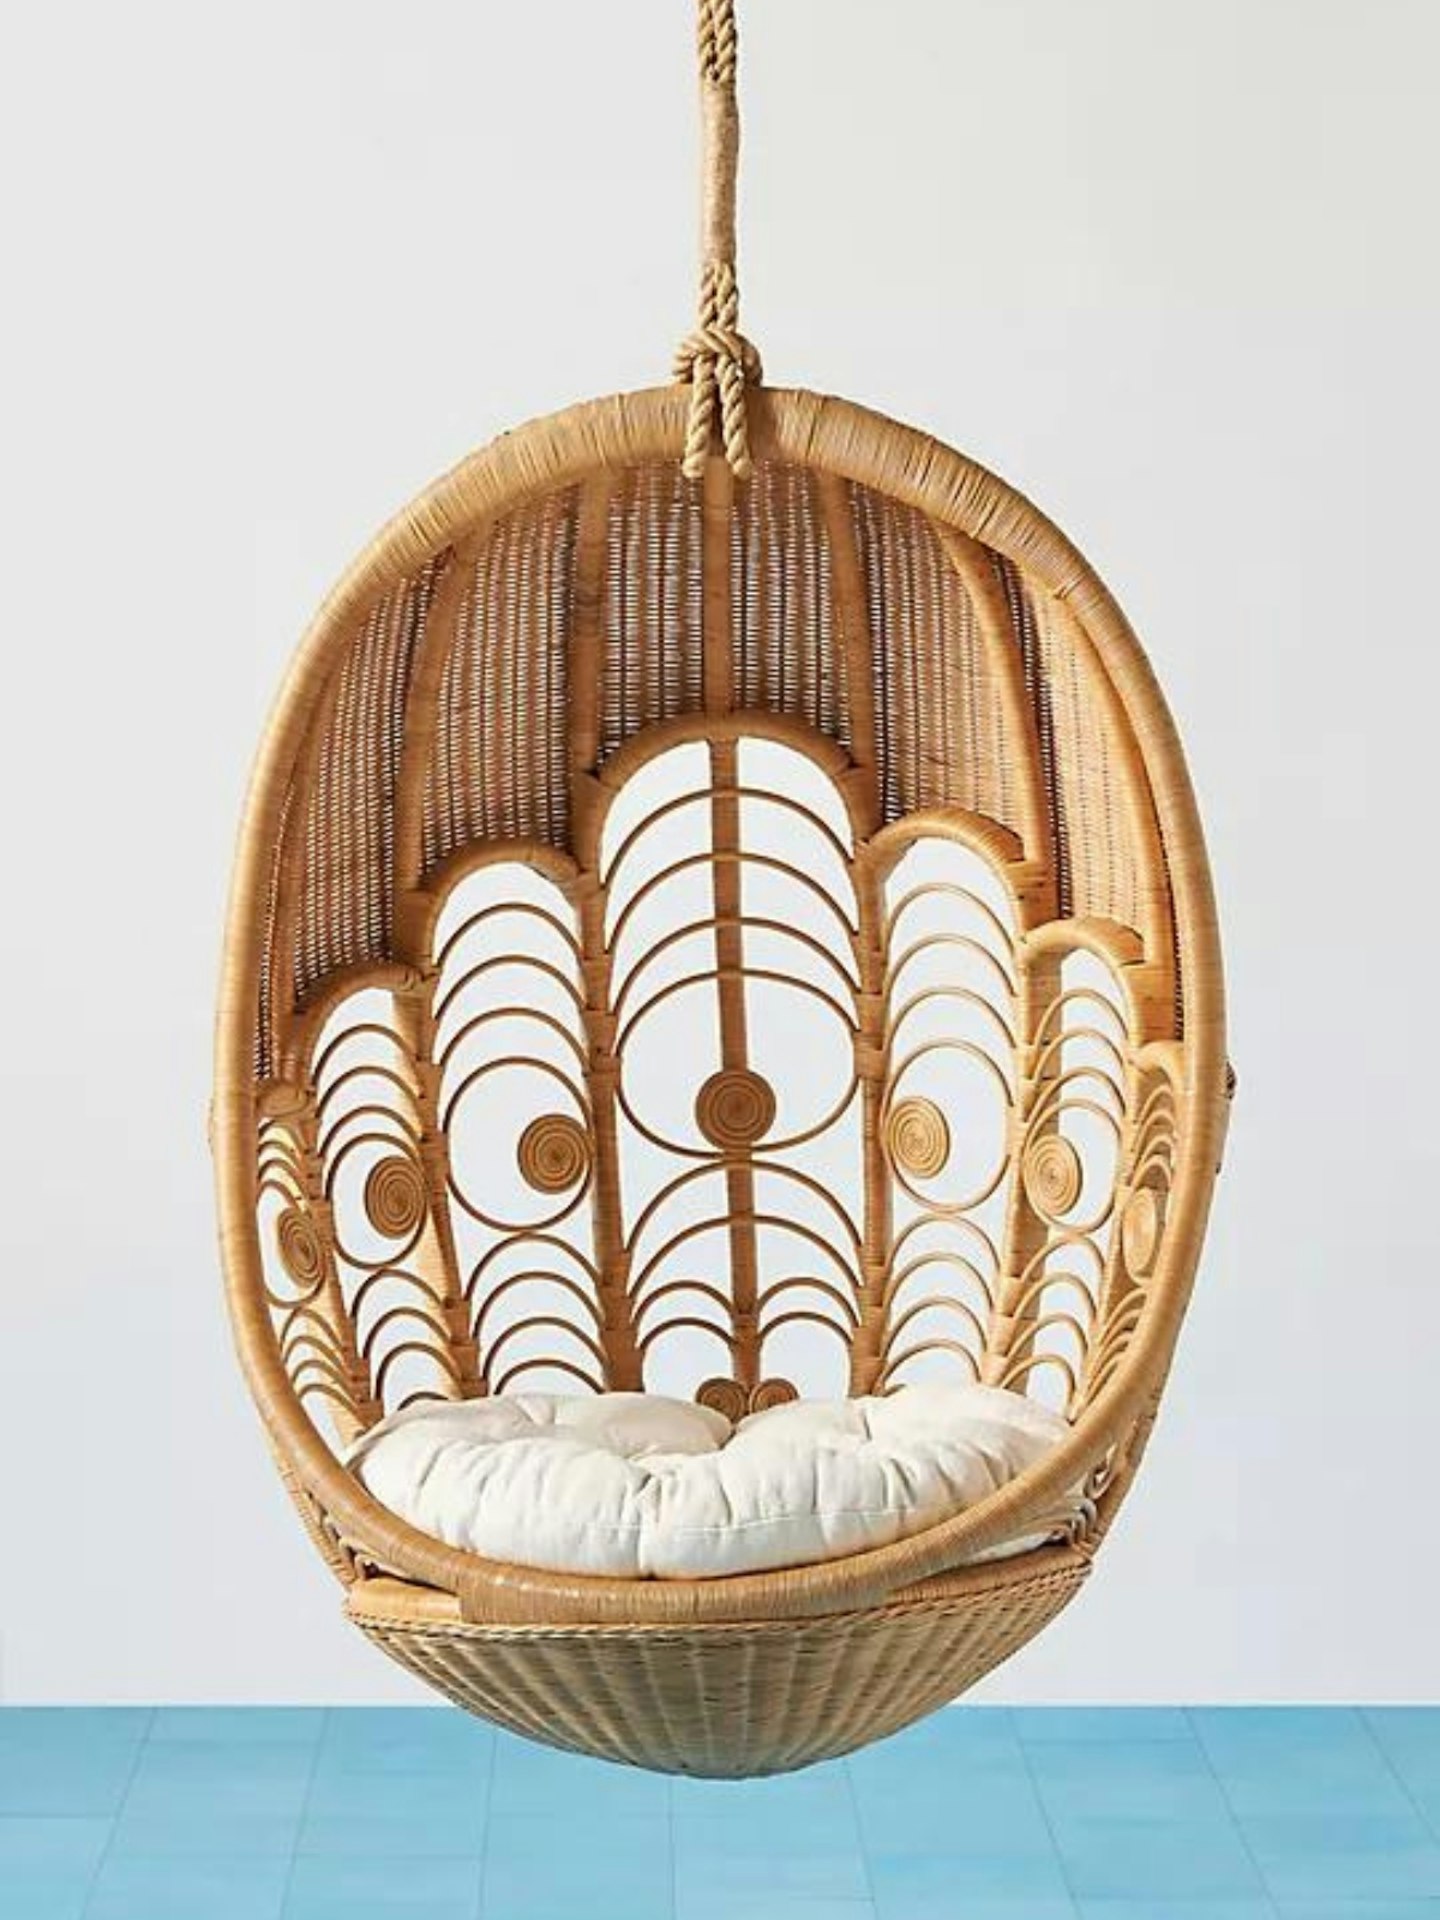 Anthropologie, Peacock Hanging Chair